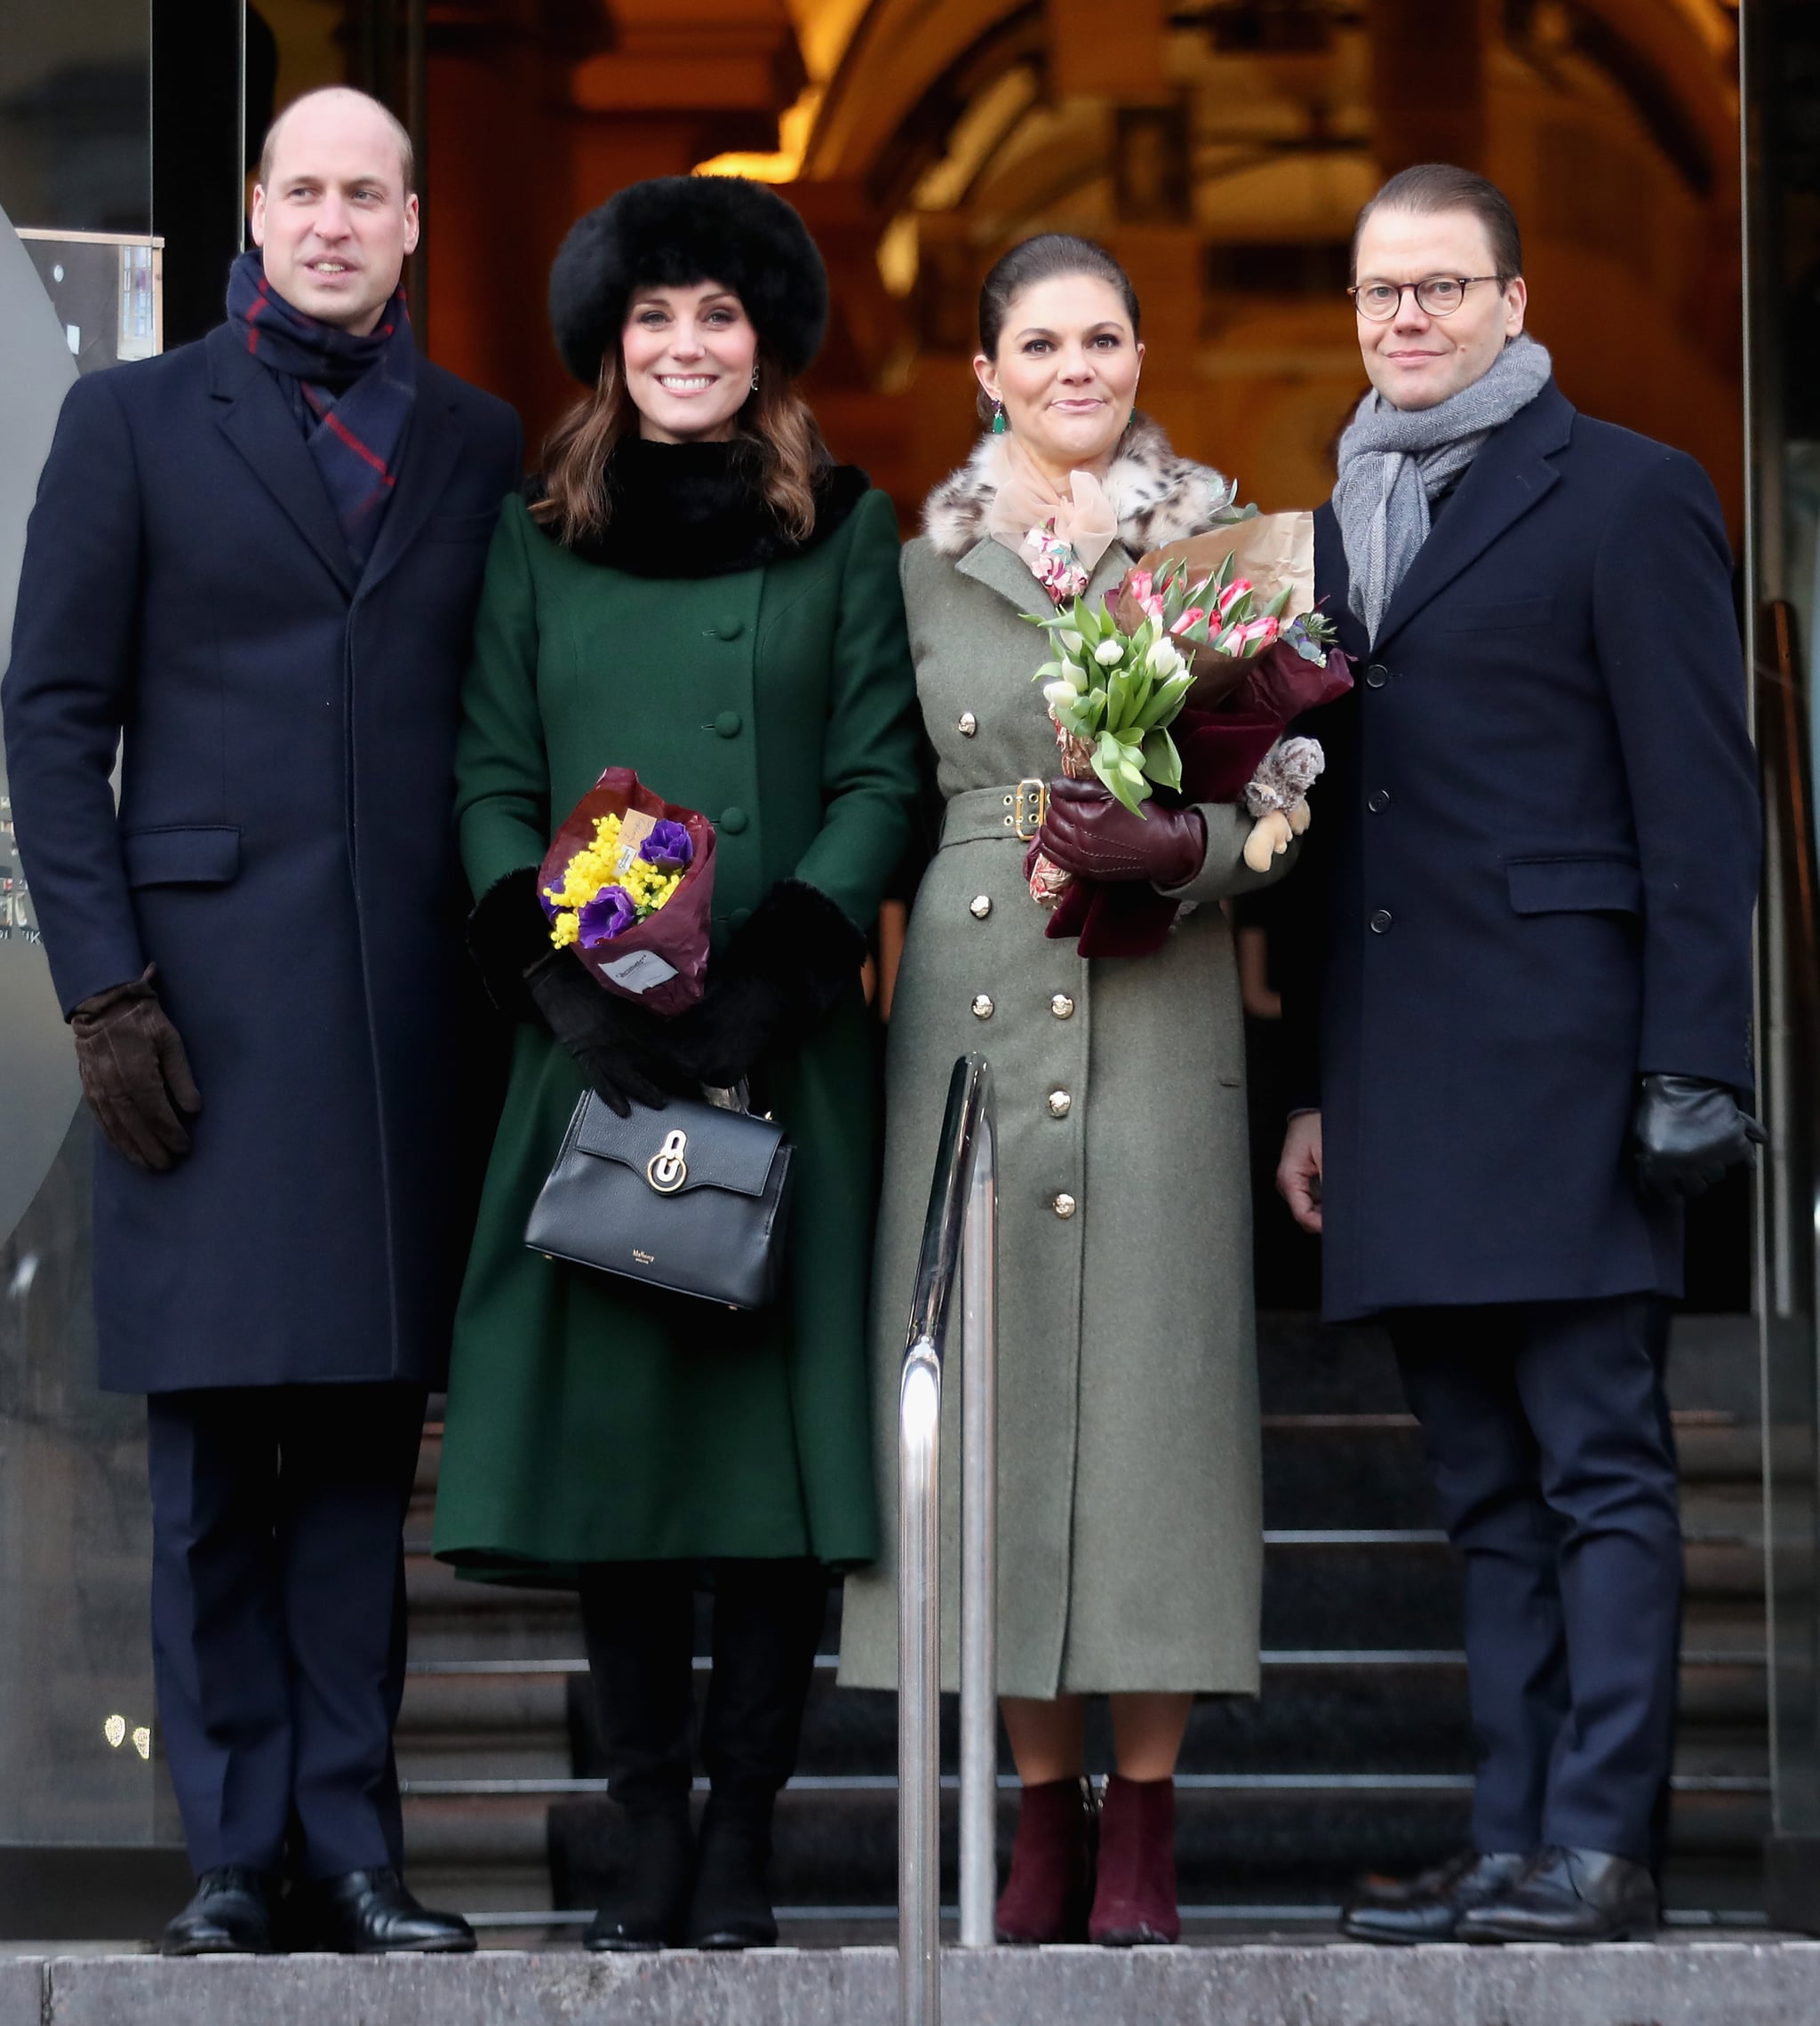 Alicia Vikander wears Louis Vuitton to meet the Duke and Duchess of  Cambridge in Stockholm